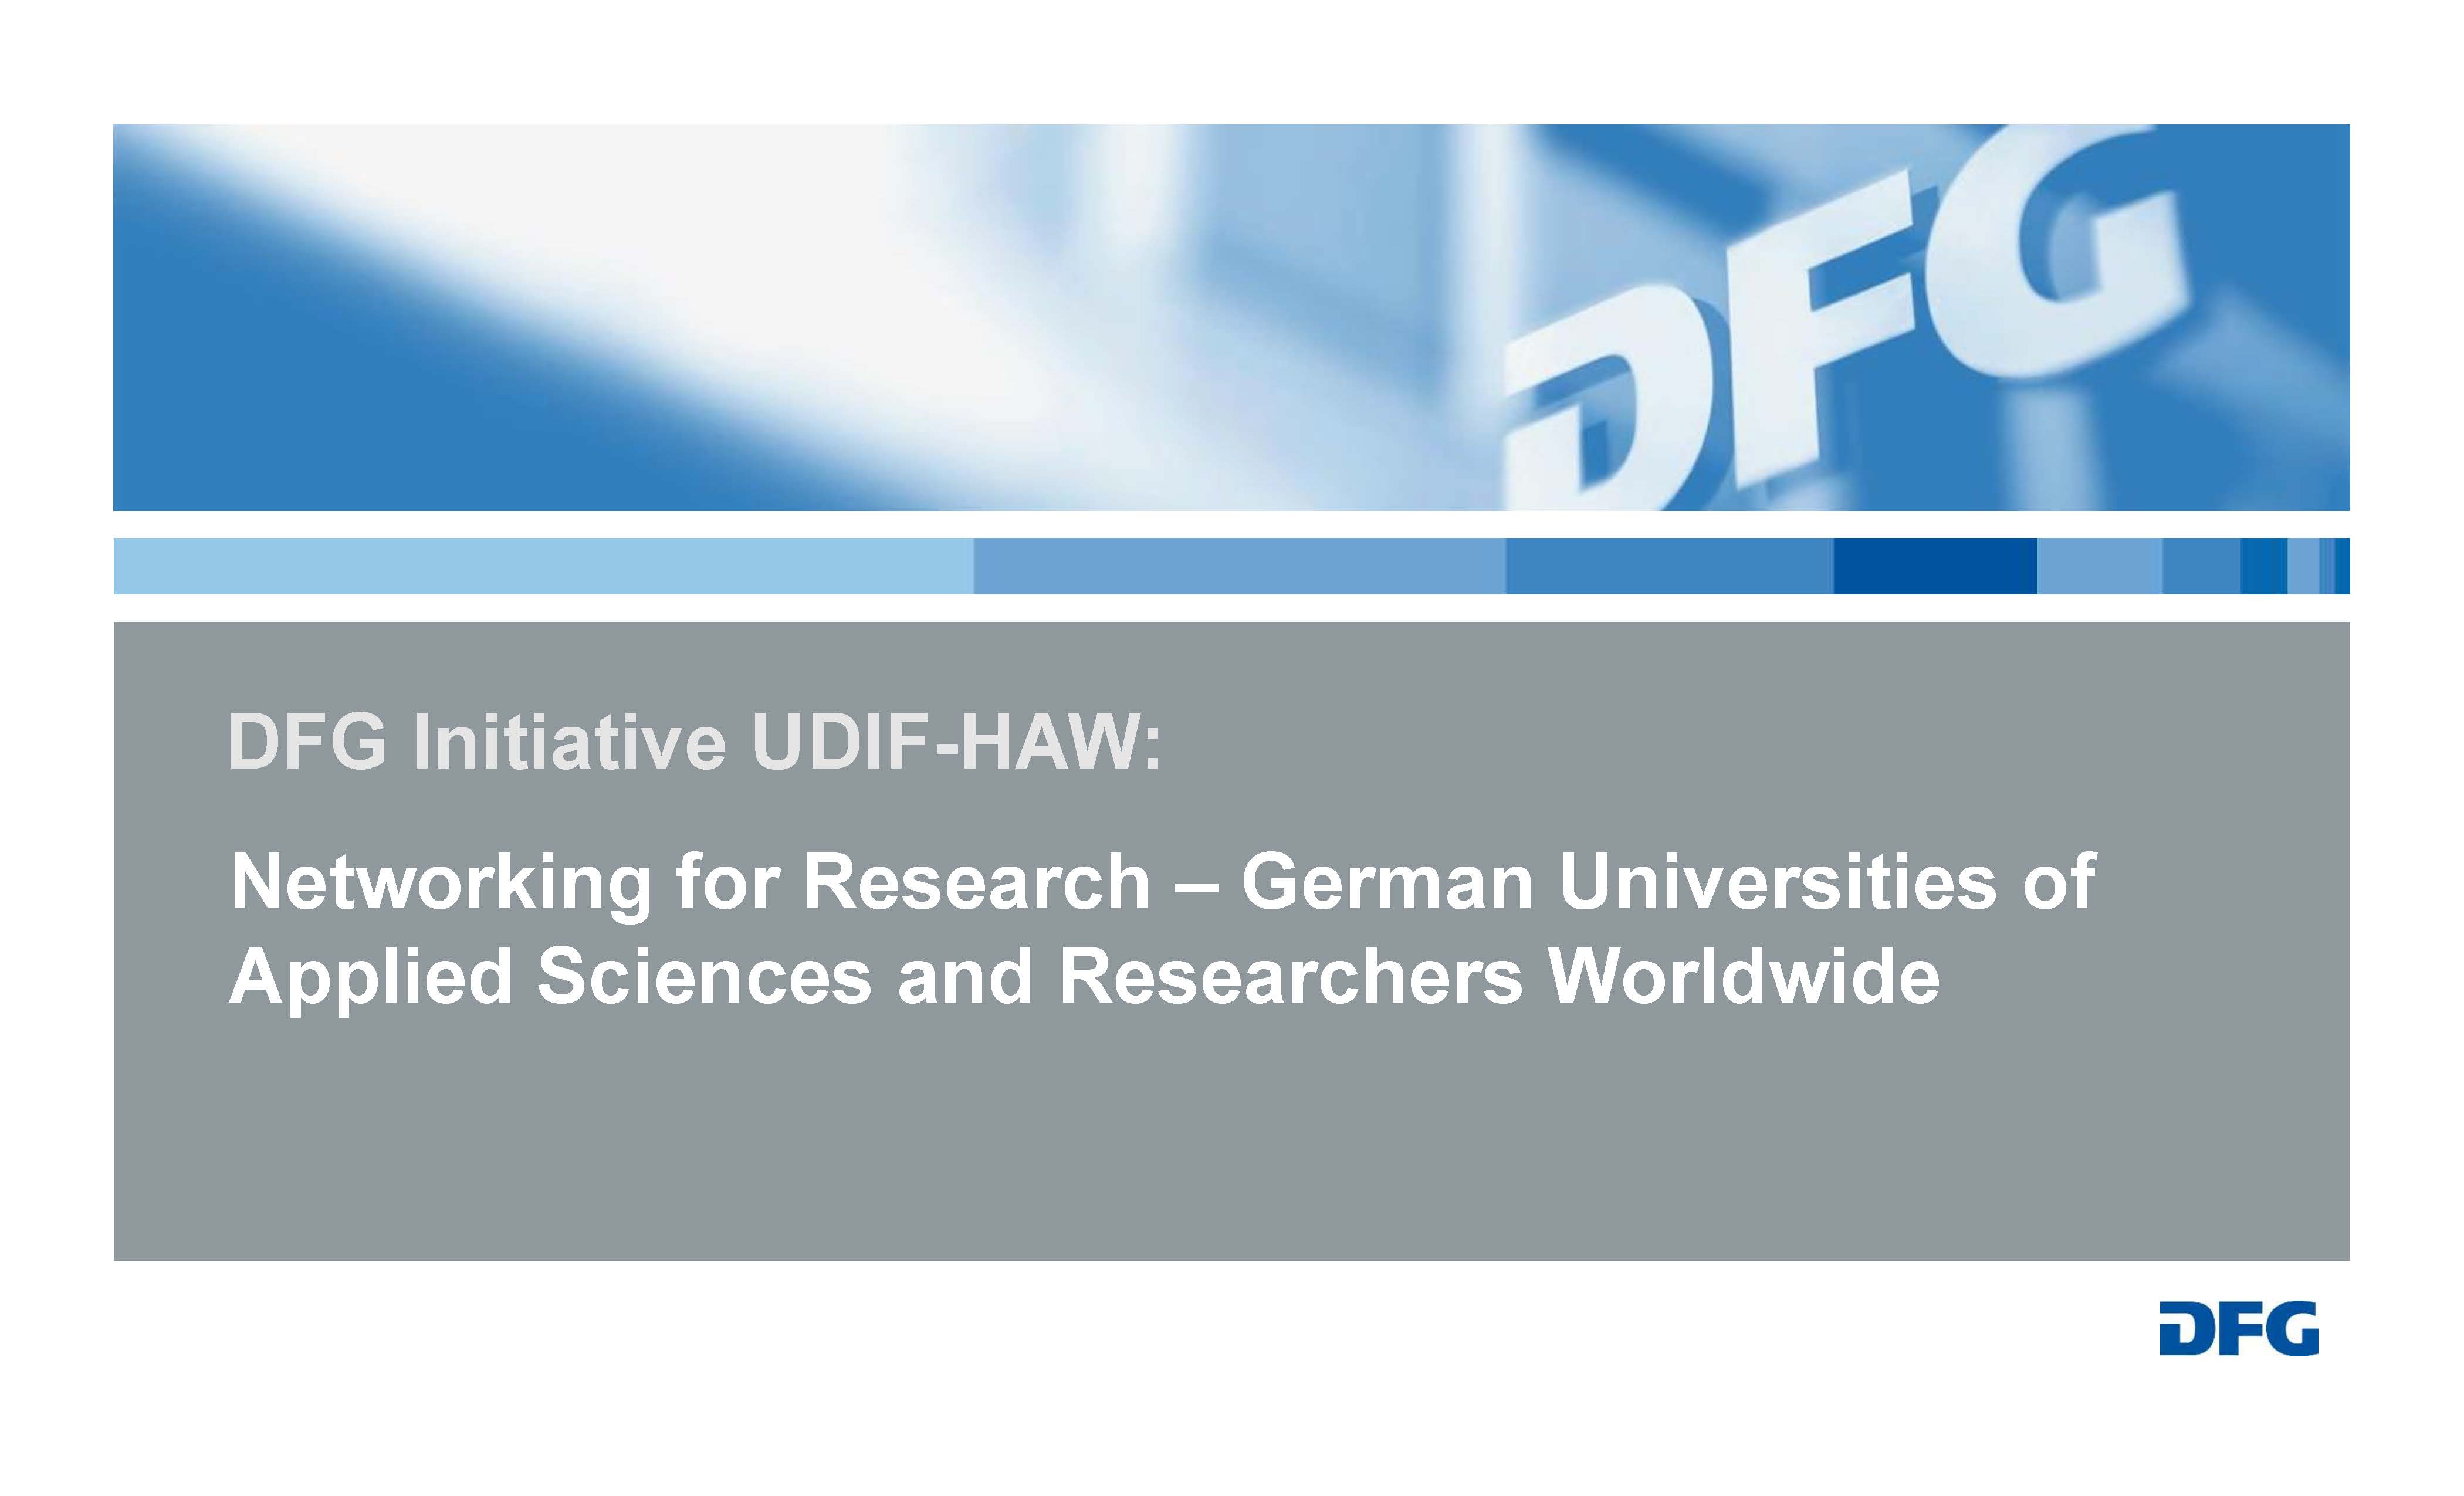 DFG Networking for Research German Universities of Applied Sciences and Researchers Worldwide